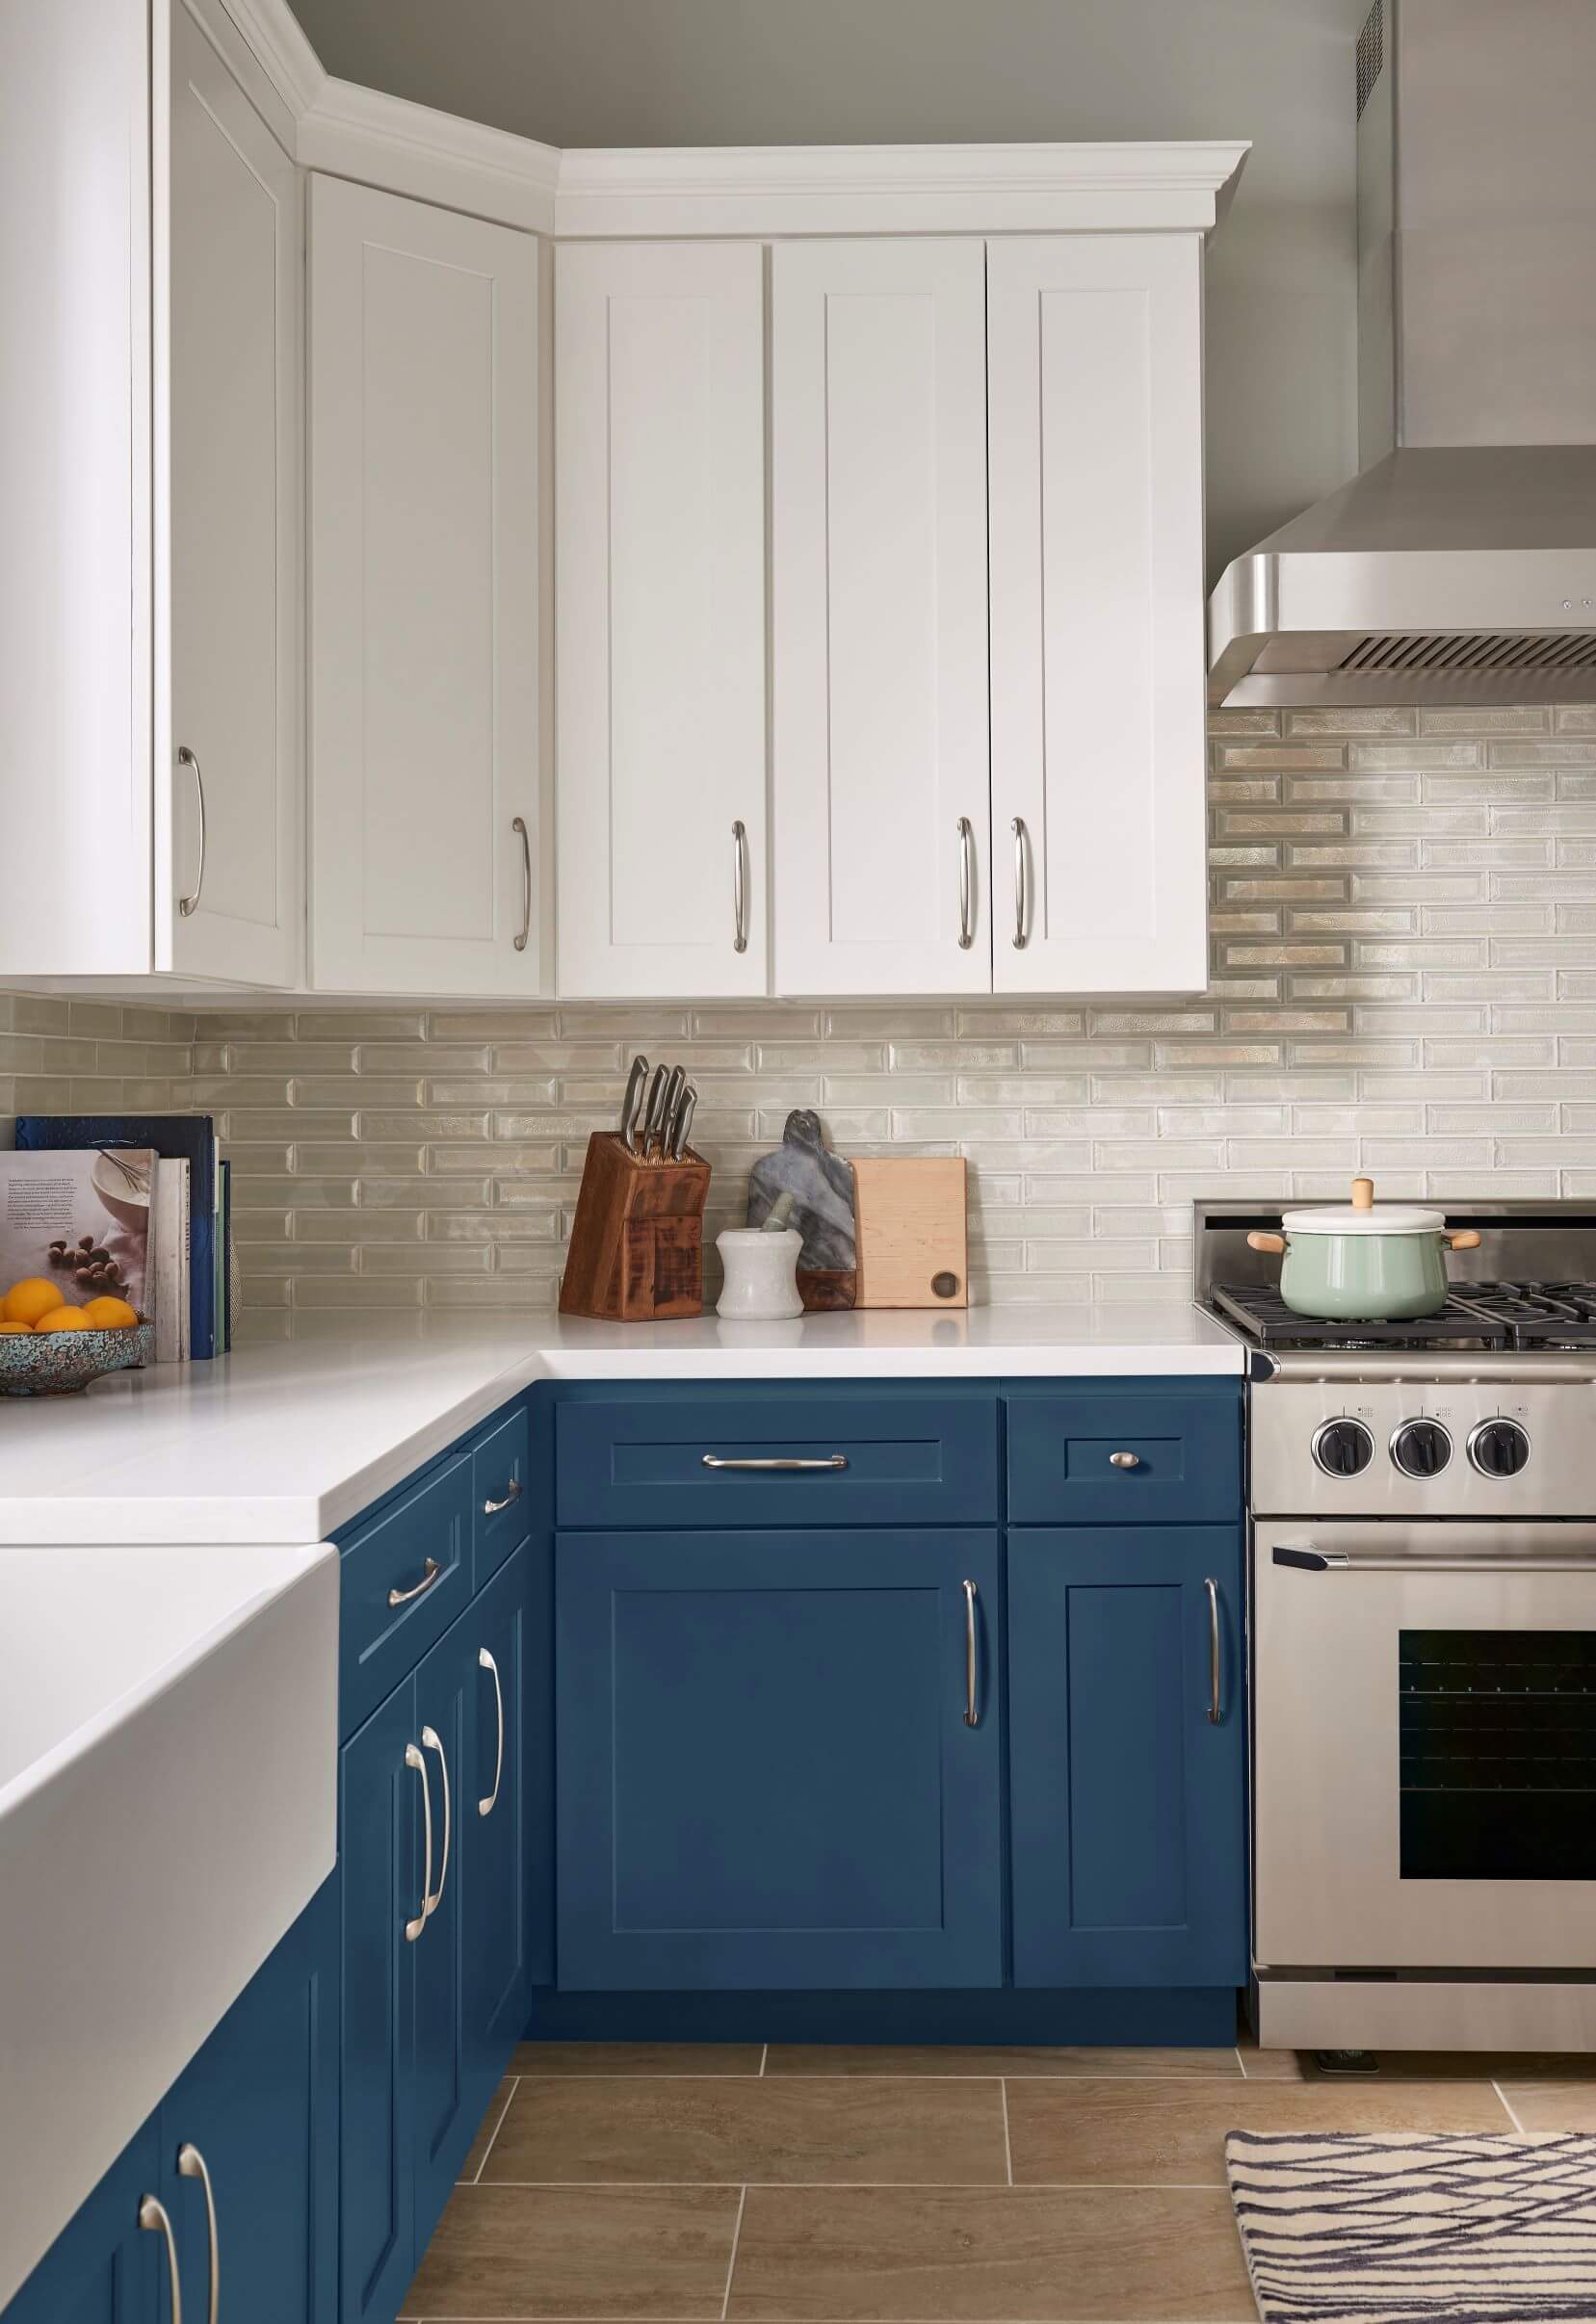 East Coast Ready to Assemble Cabinets - white and blue kitchen cabinets